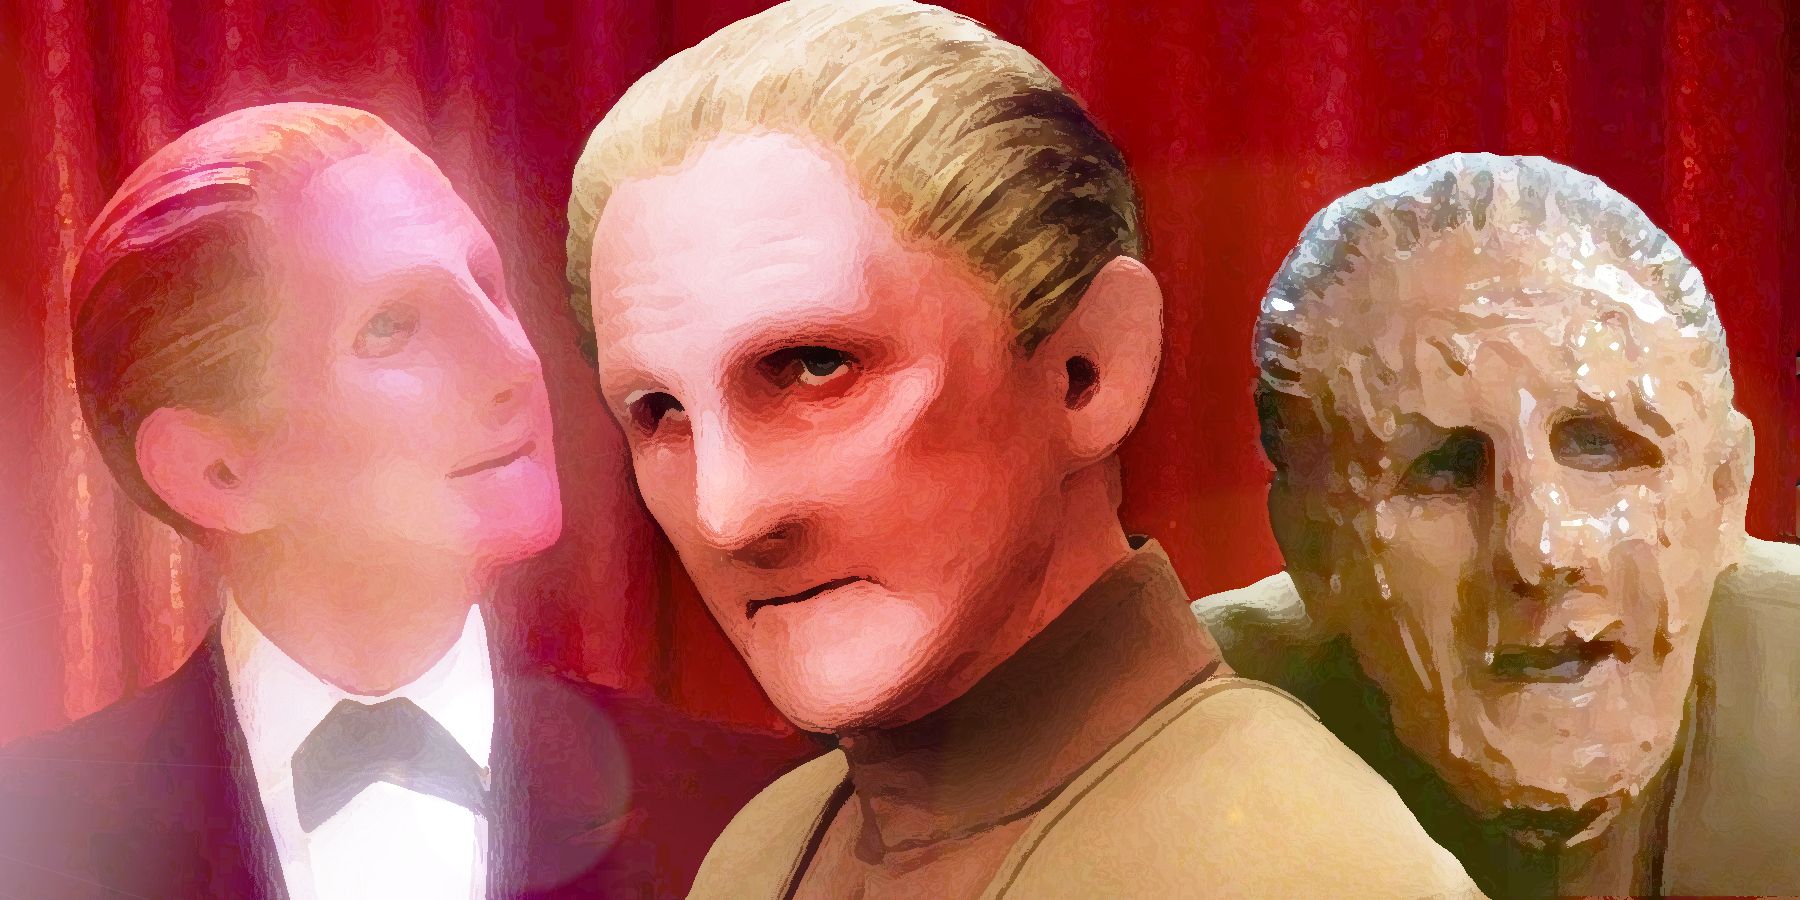 Star Trek: DS9 Tried To Make Odo More Like TNG’s Data In 1 Big Way